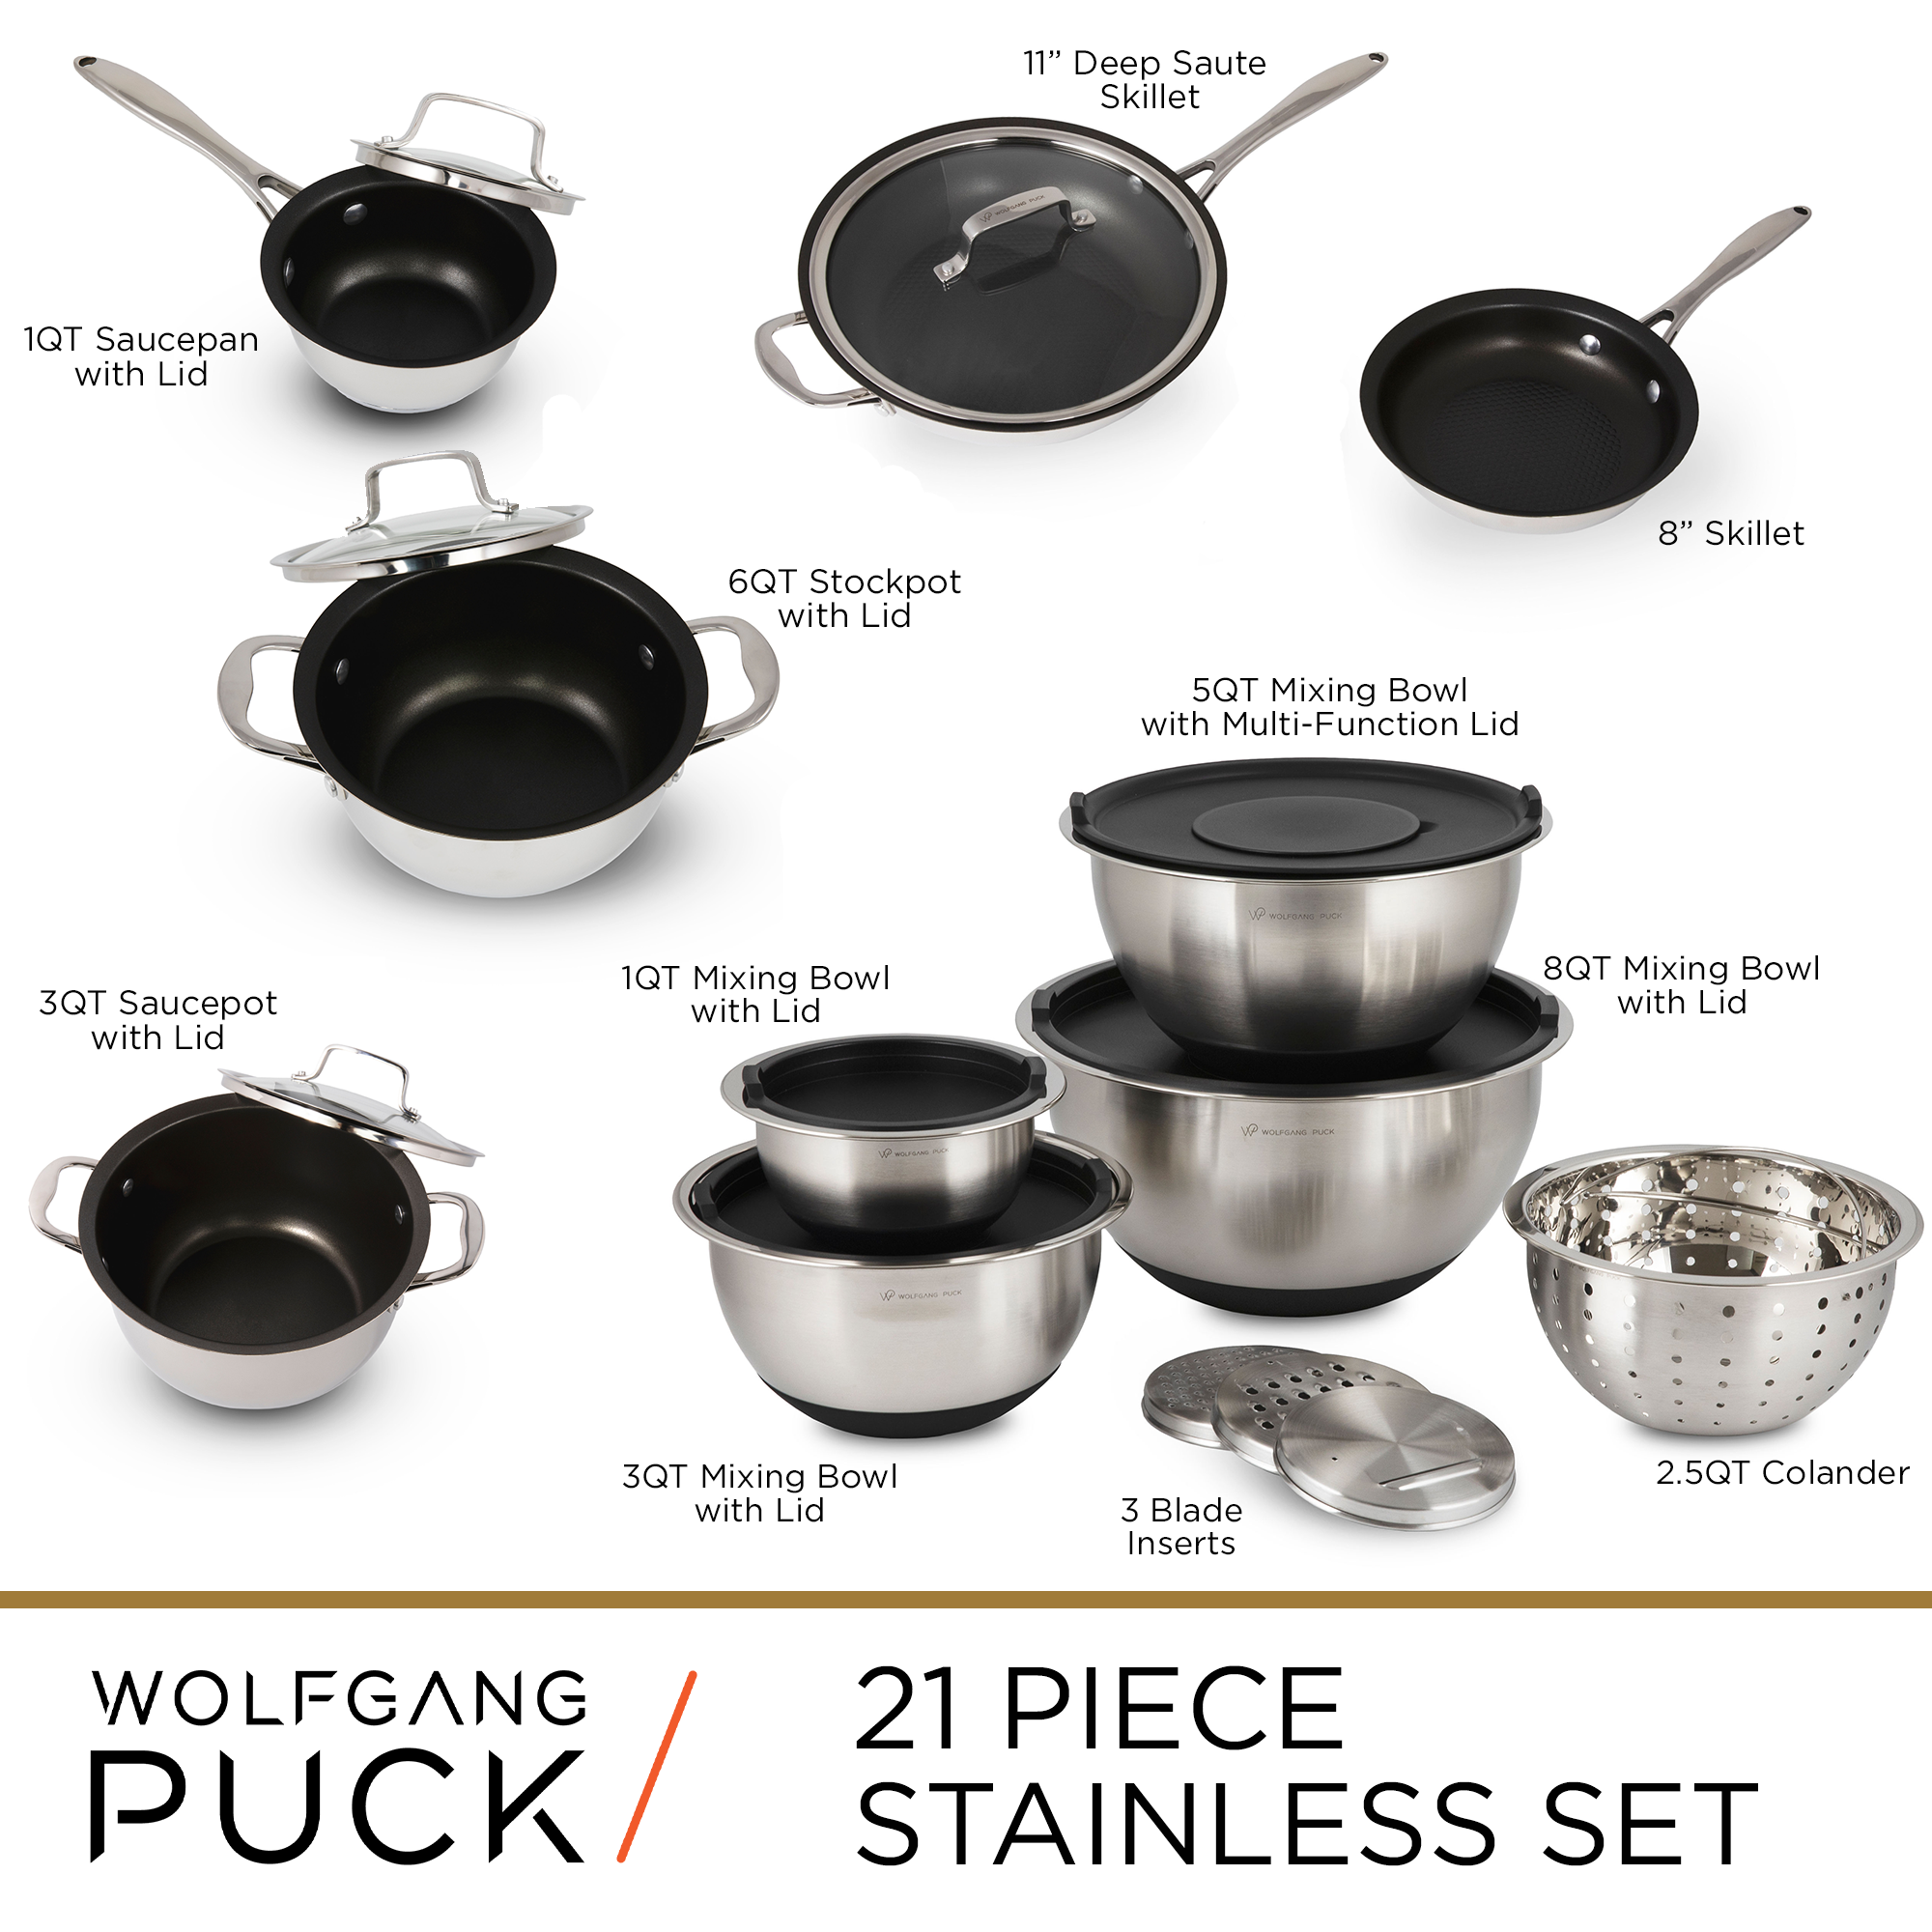 WOLFGANG PUCK 9-PC STAINLESS STEEL COOKWARE - NWT - household items - by  owner - housewares sale - craigslist